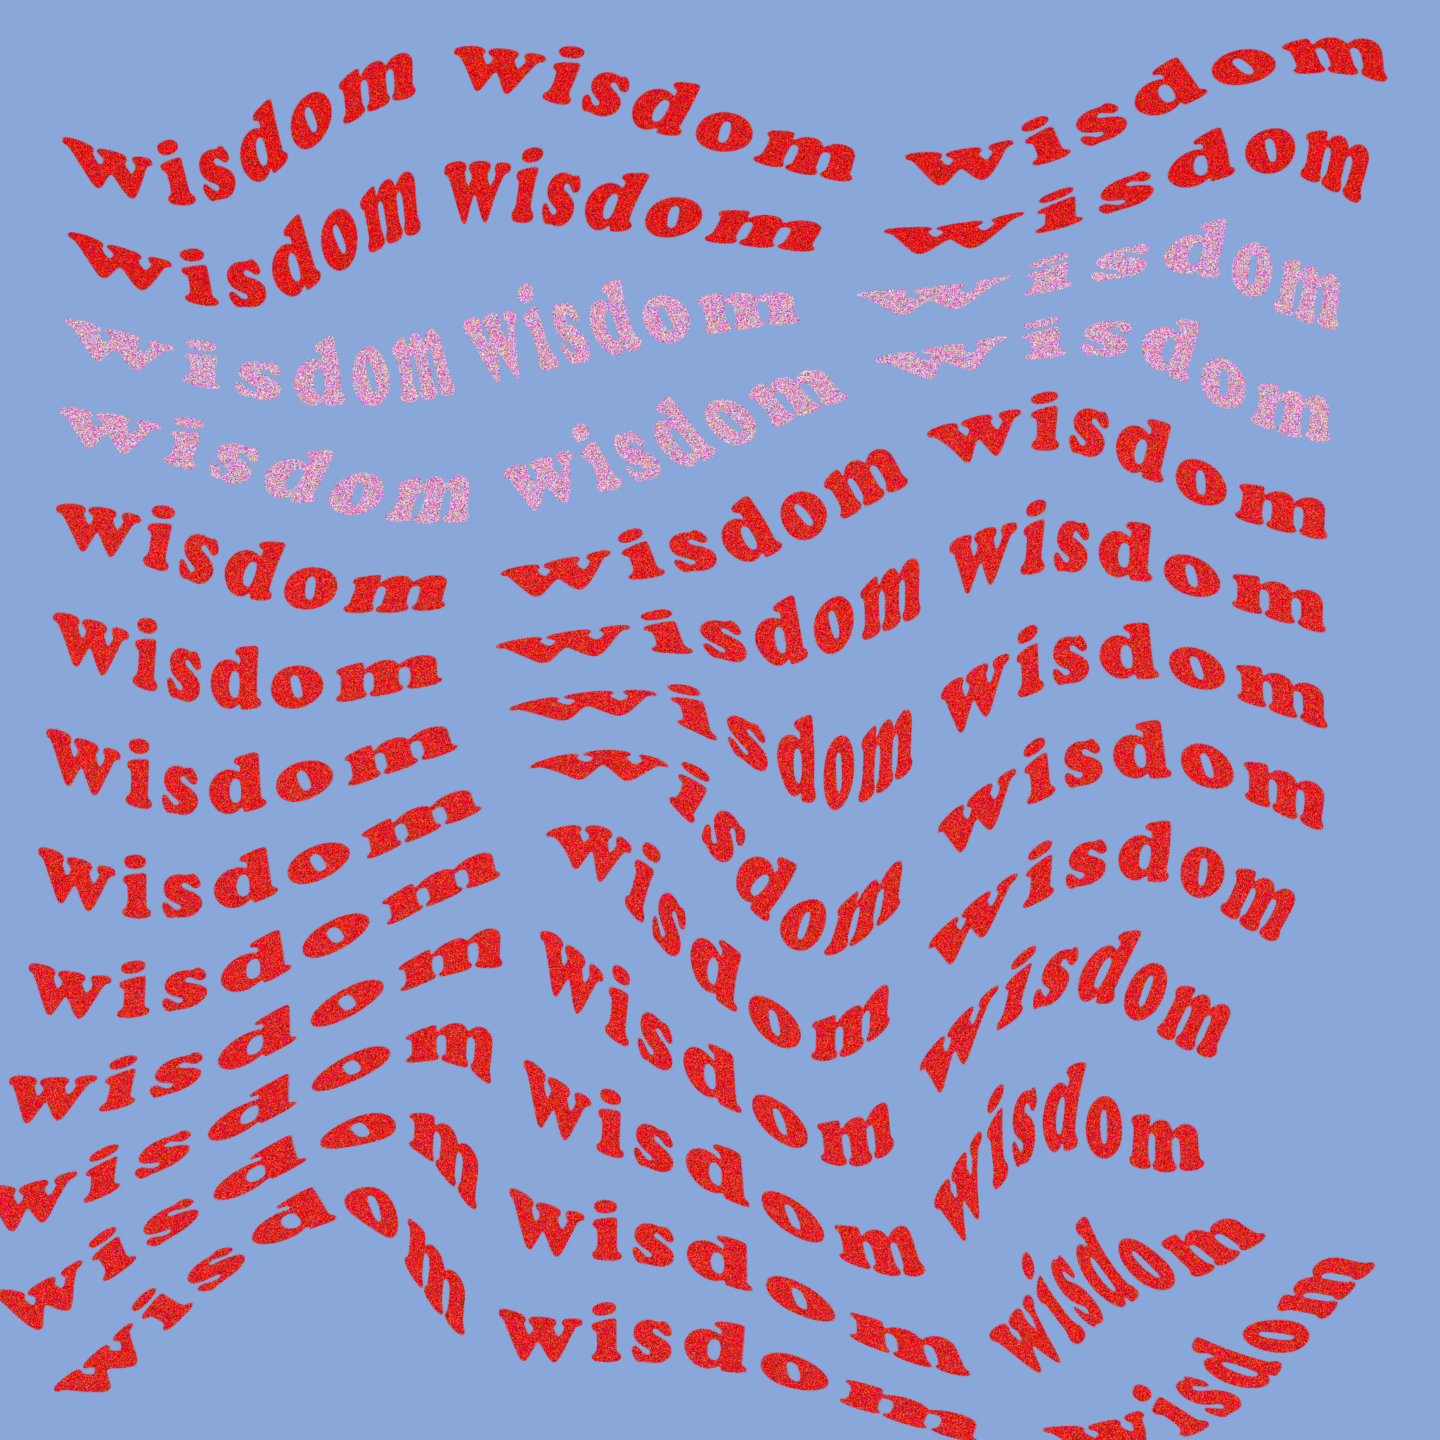 Wisdom is Closer Than You Think – James 1:5